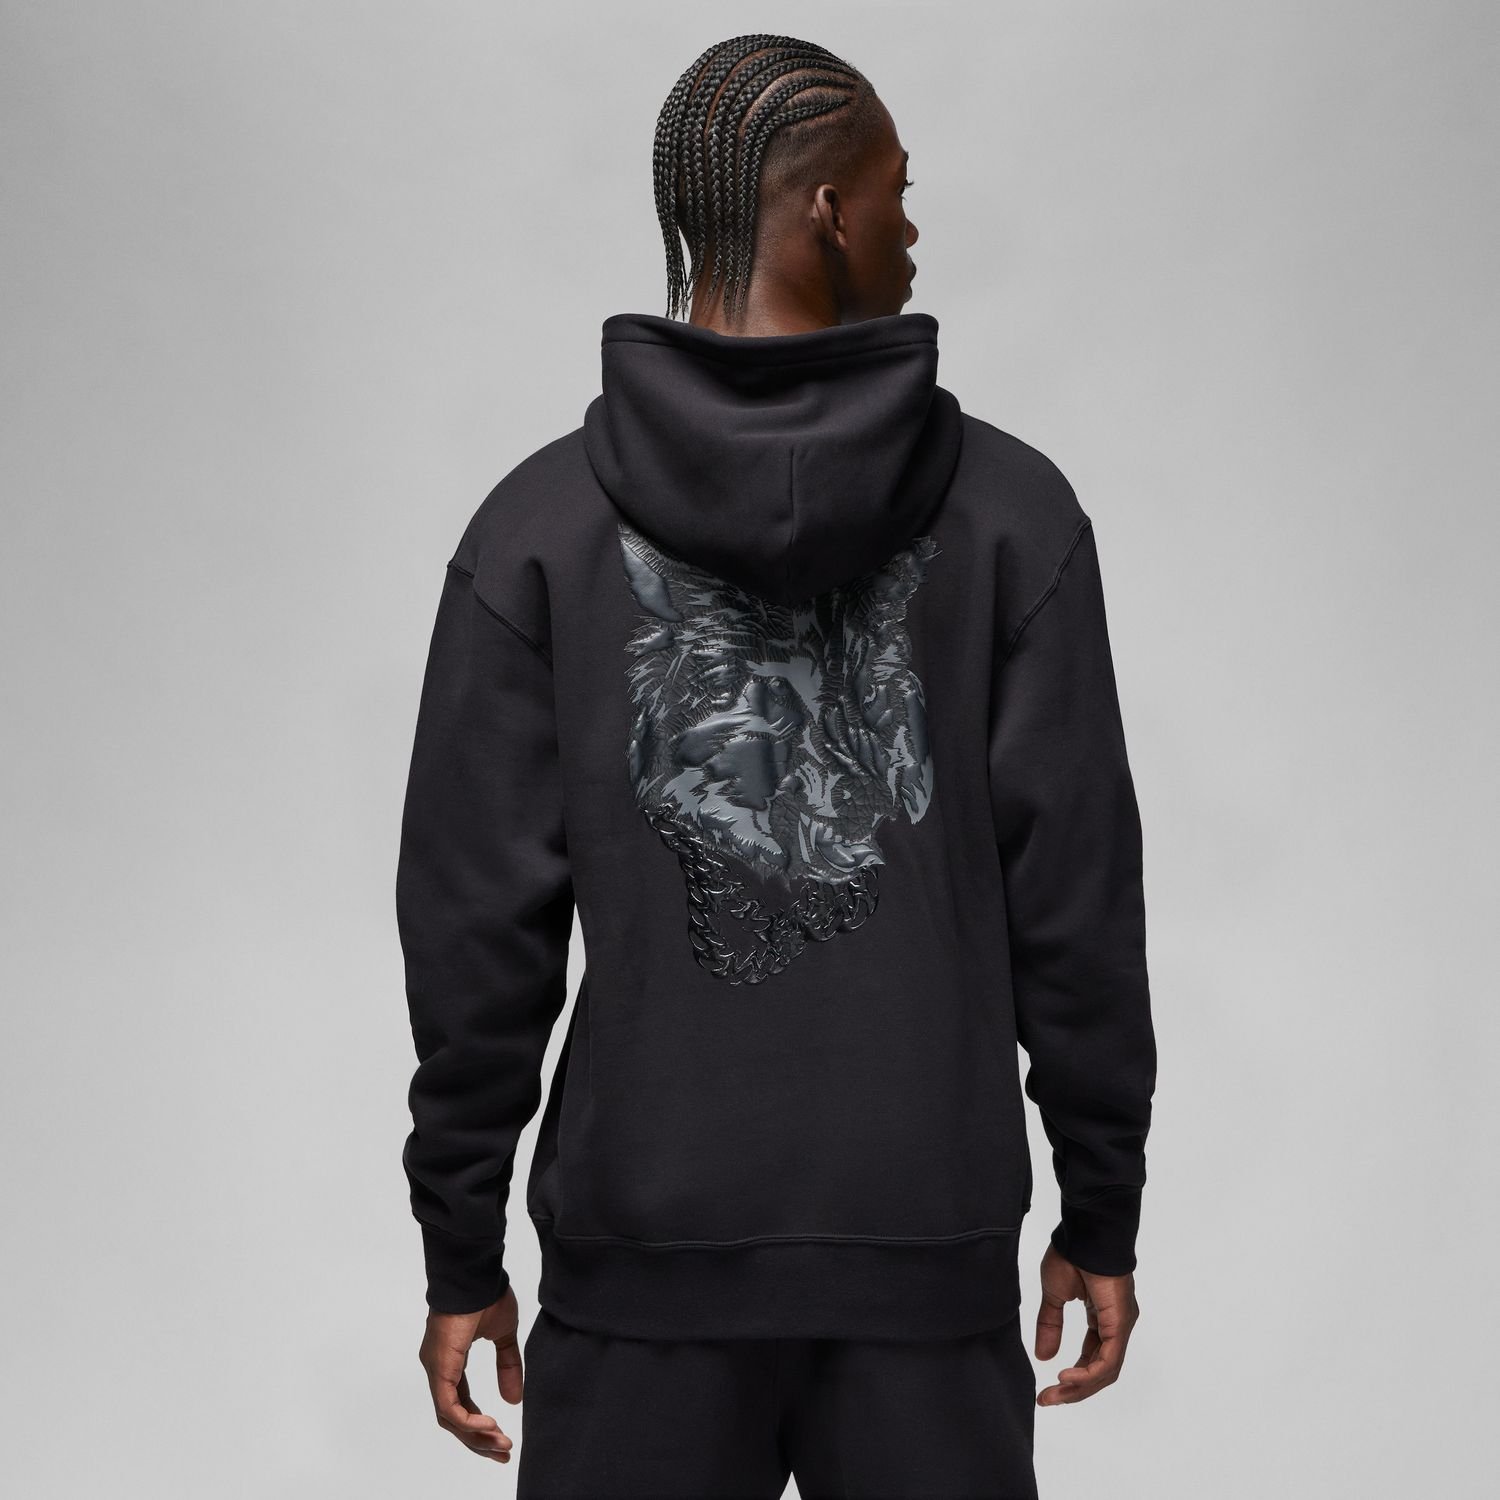 Why Not? Graphic Hoodie